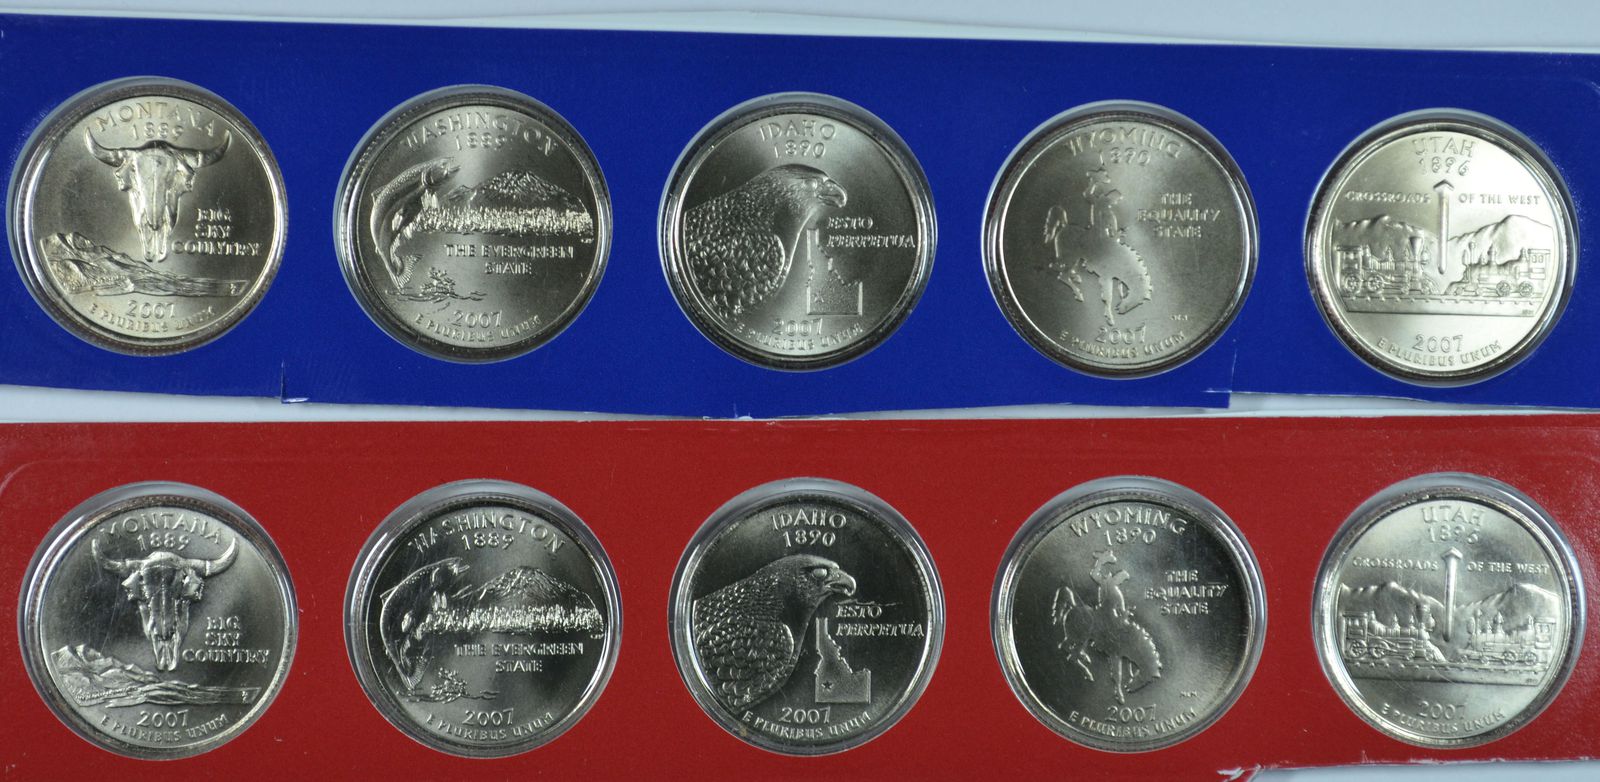 2007 P & D States uncirculated quarters in mint cello - $10.50